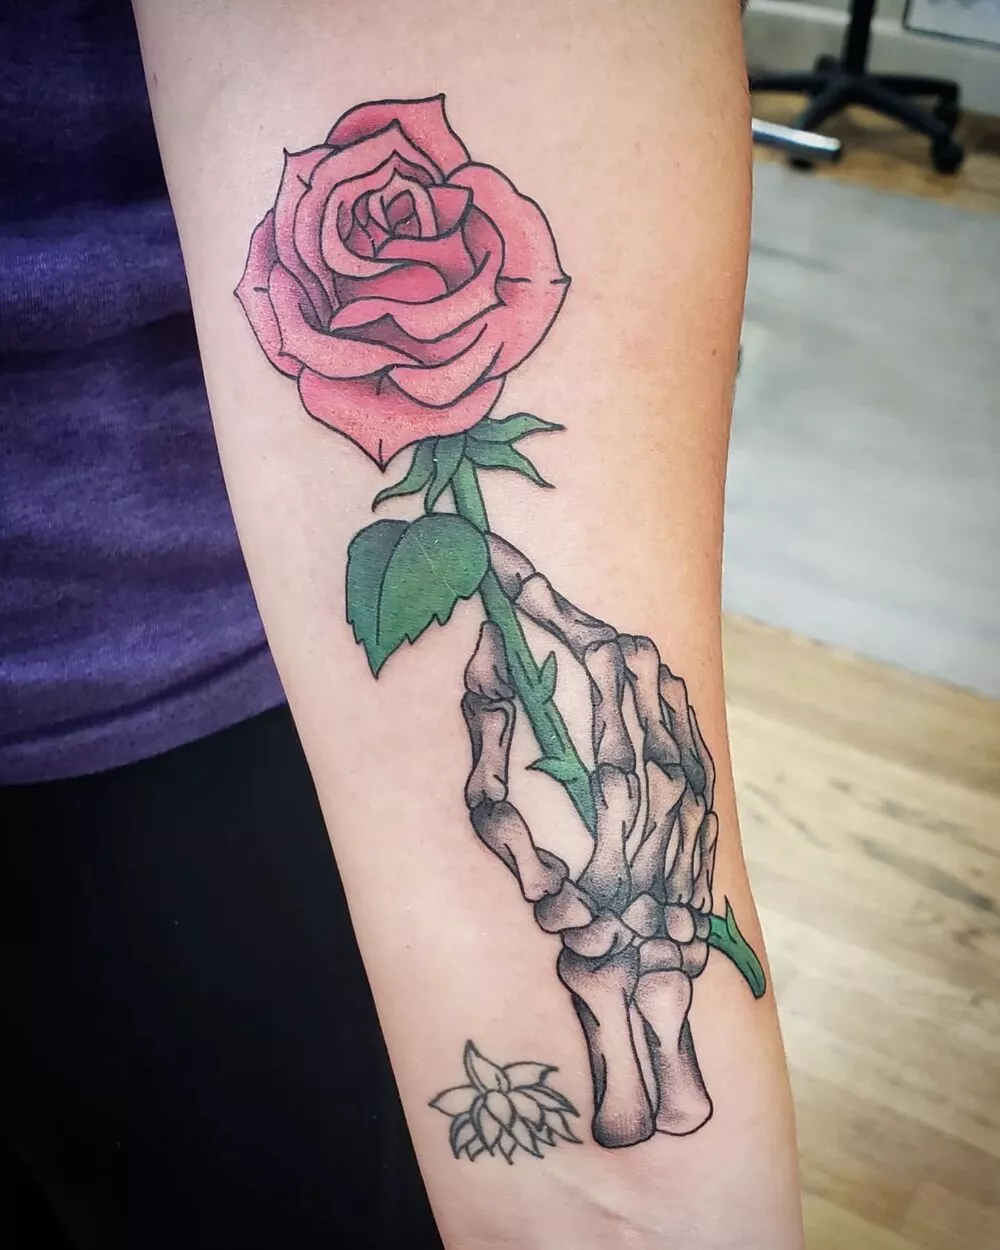 A Close-up Image of Black Skeleton Hand Holding Red Rose Tattoo